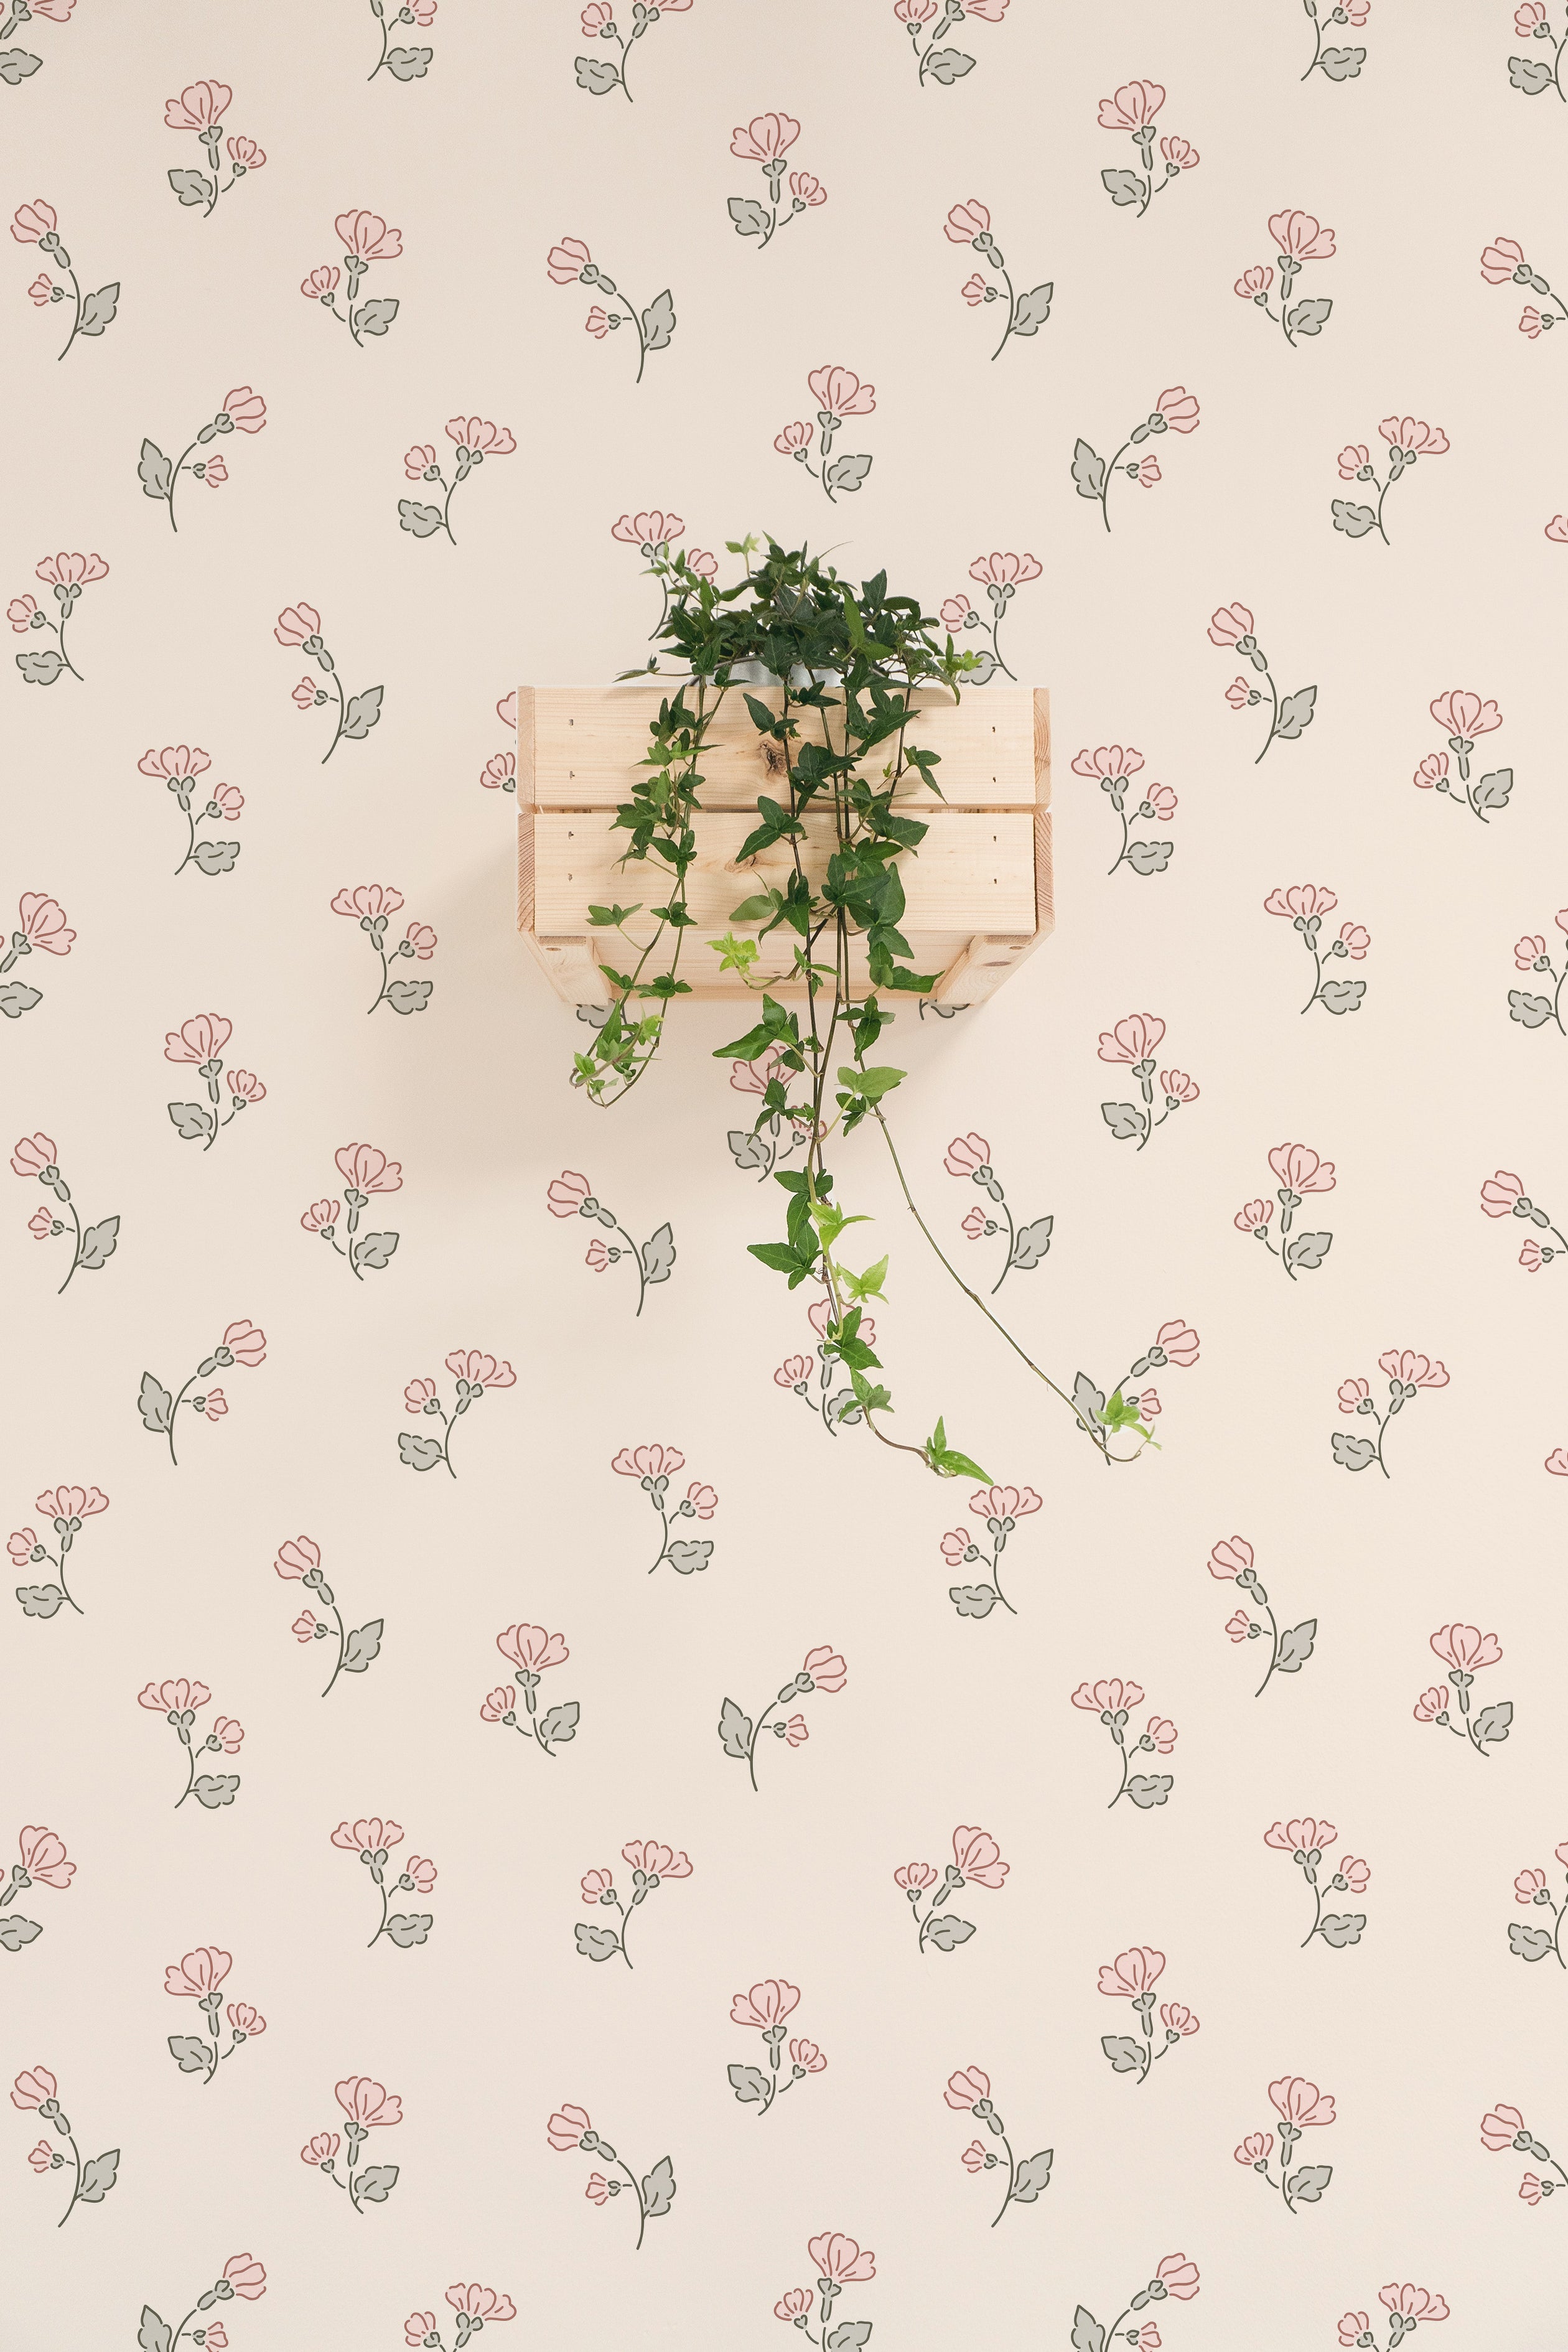 An elegant interior scene featuring Chara Wallpaper with a charming pattern of pink floral blooms and subtle green foliage on a cream background. A wooden box shelf on the wall is adorned with a lush green plant draping over the sides, complementing the floral theme of the wallpaper.